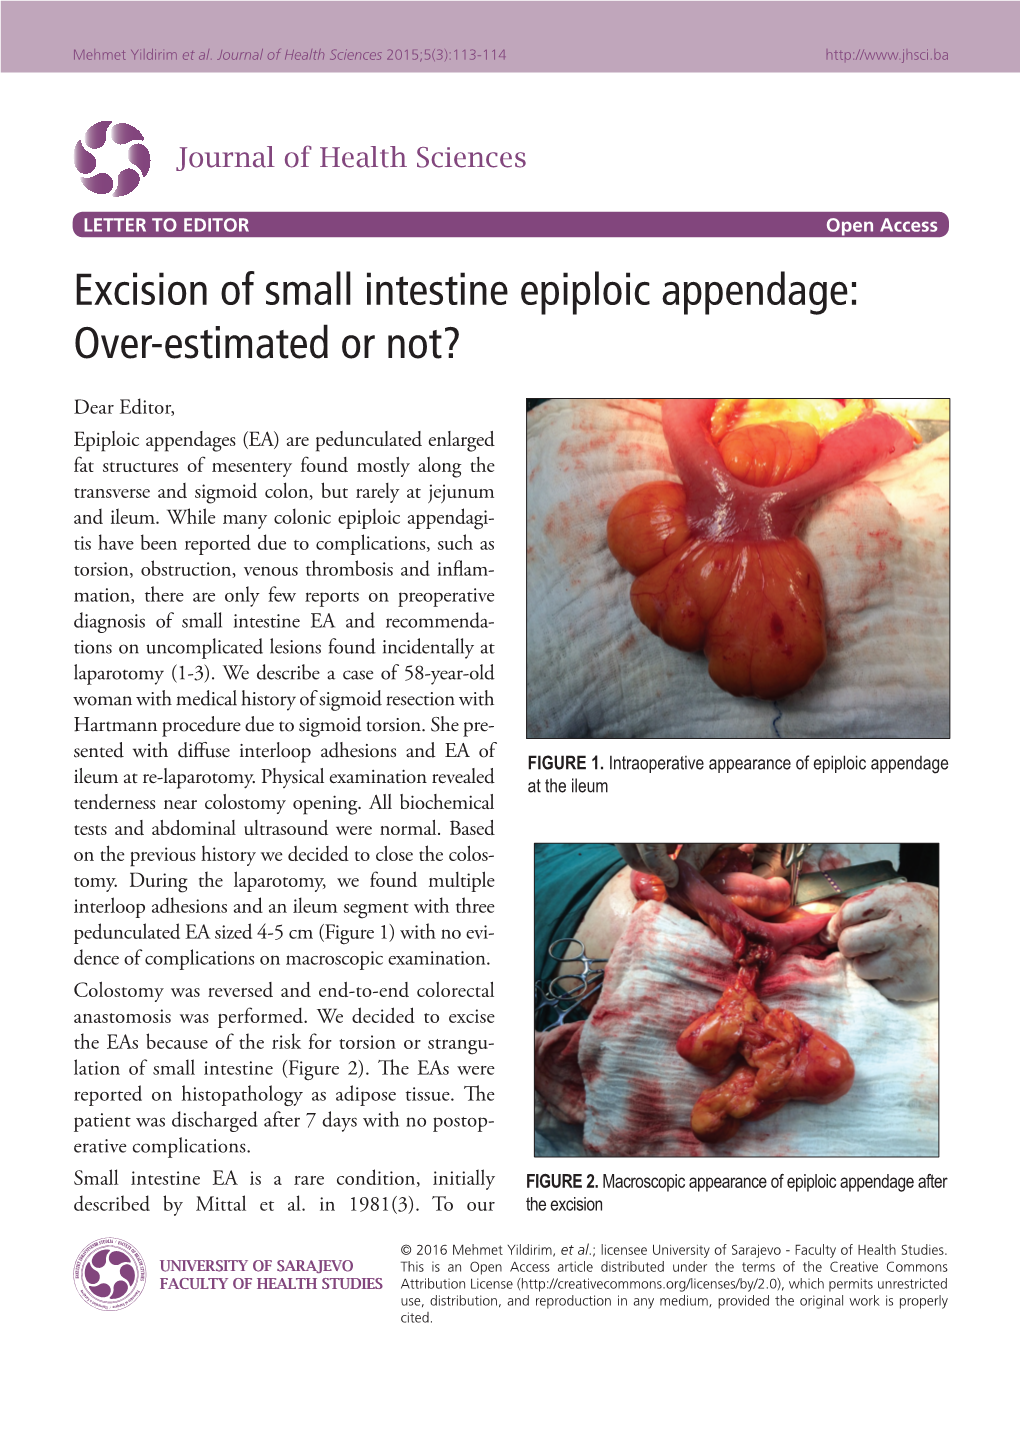 Excision of Small Intestine Epiploic Appendage: Over-Estimated Or Not?